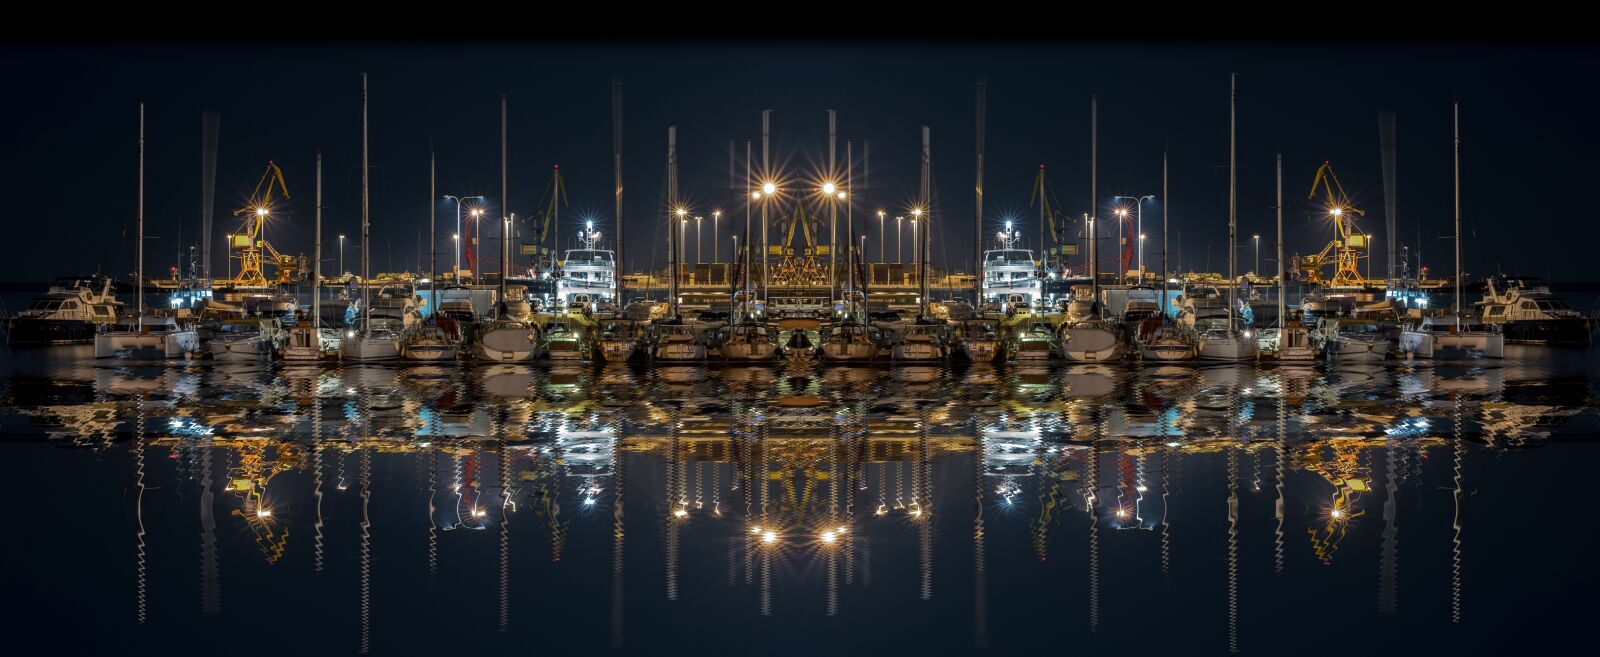 Nikon D810 sample photo. Boats, harbour, night, photography photography